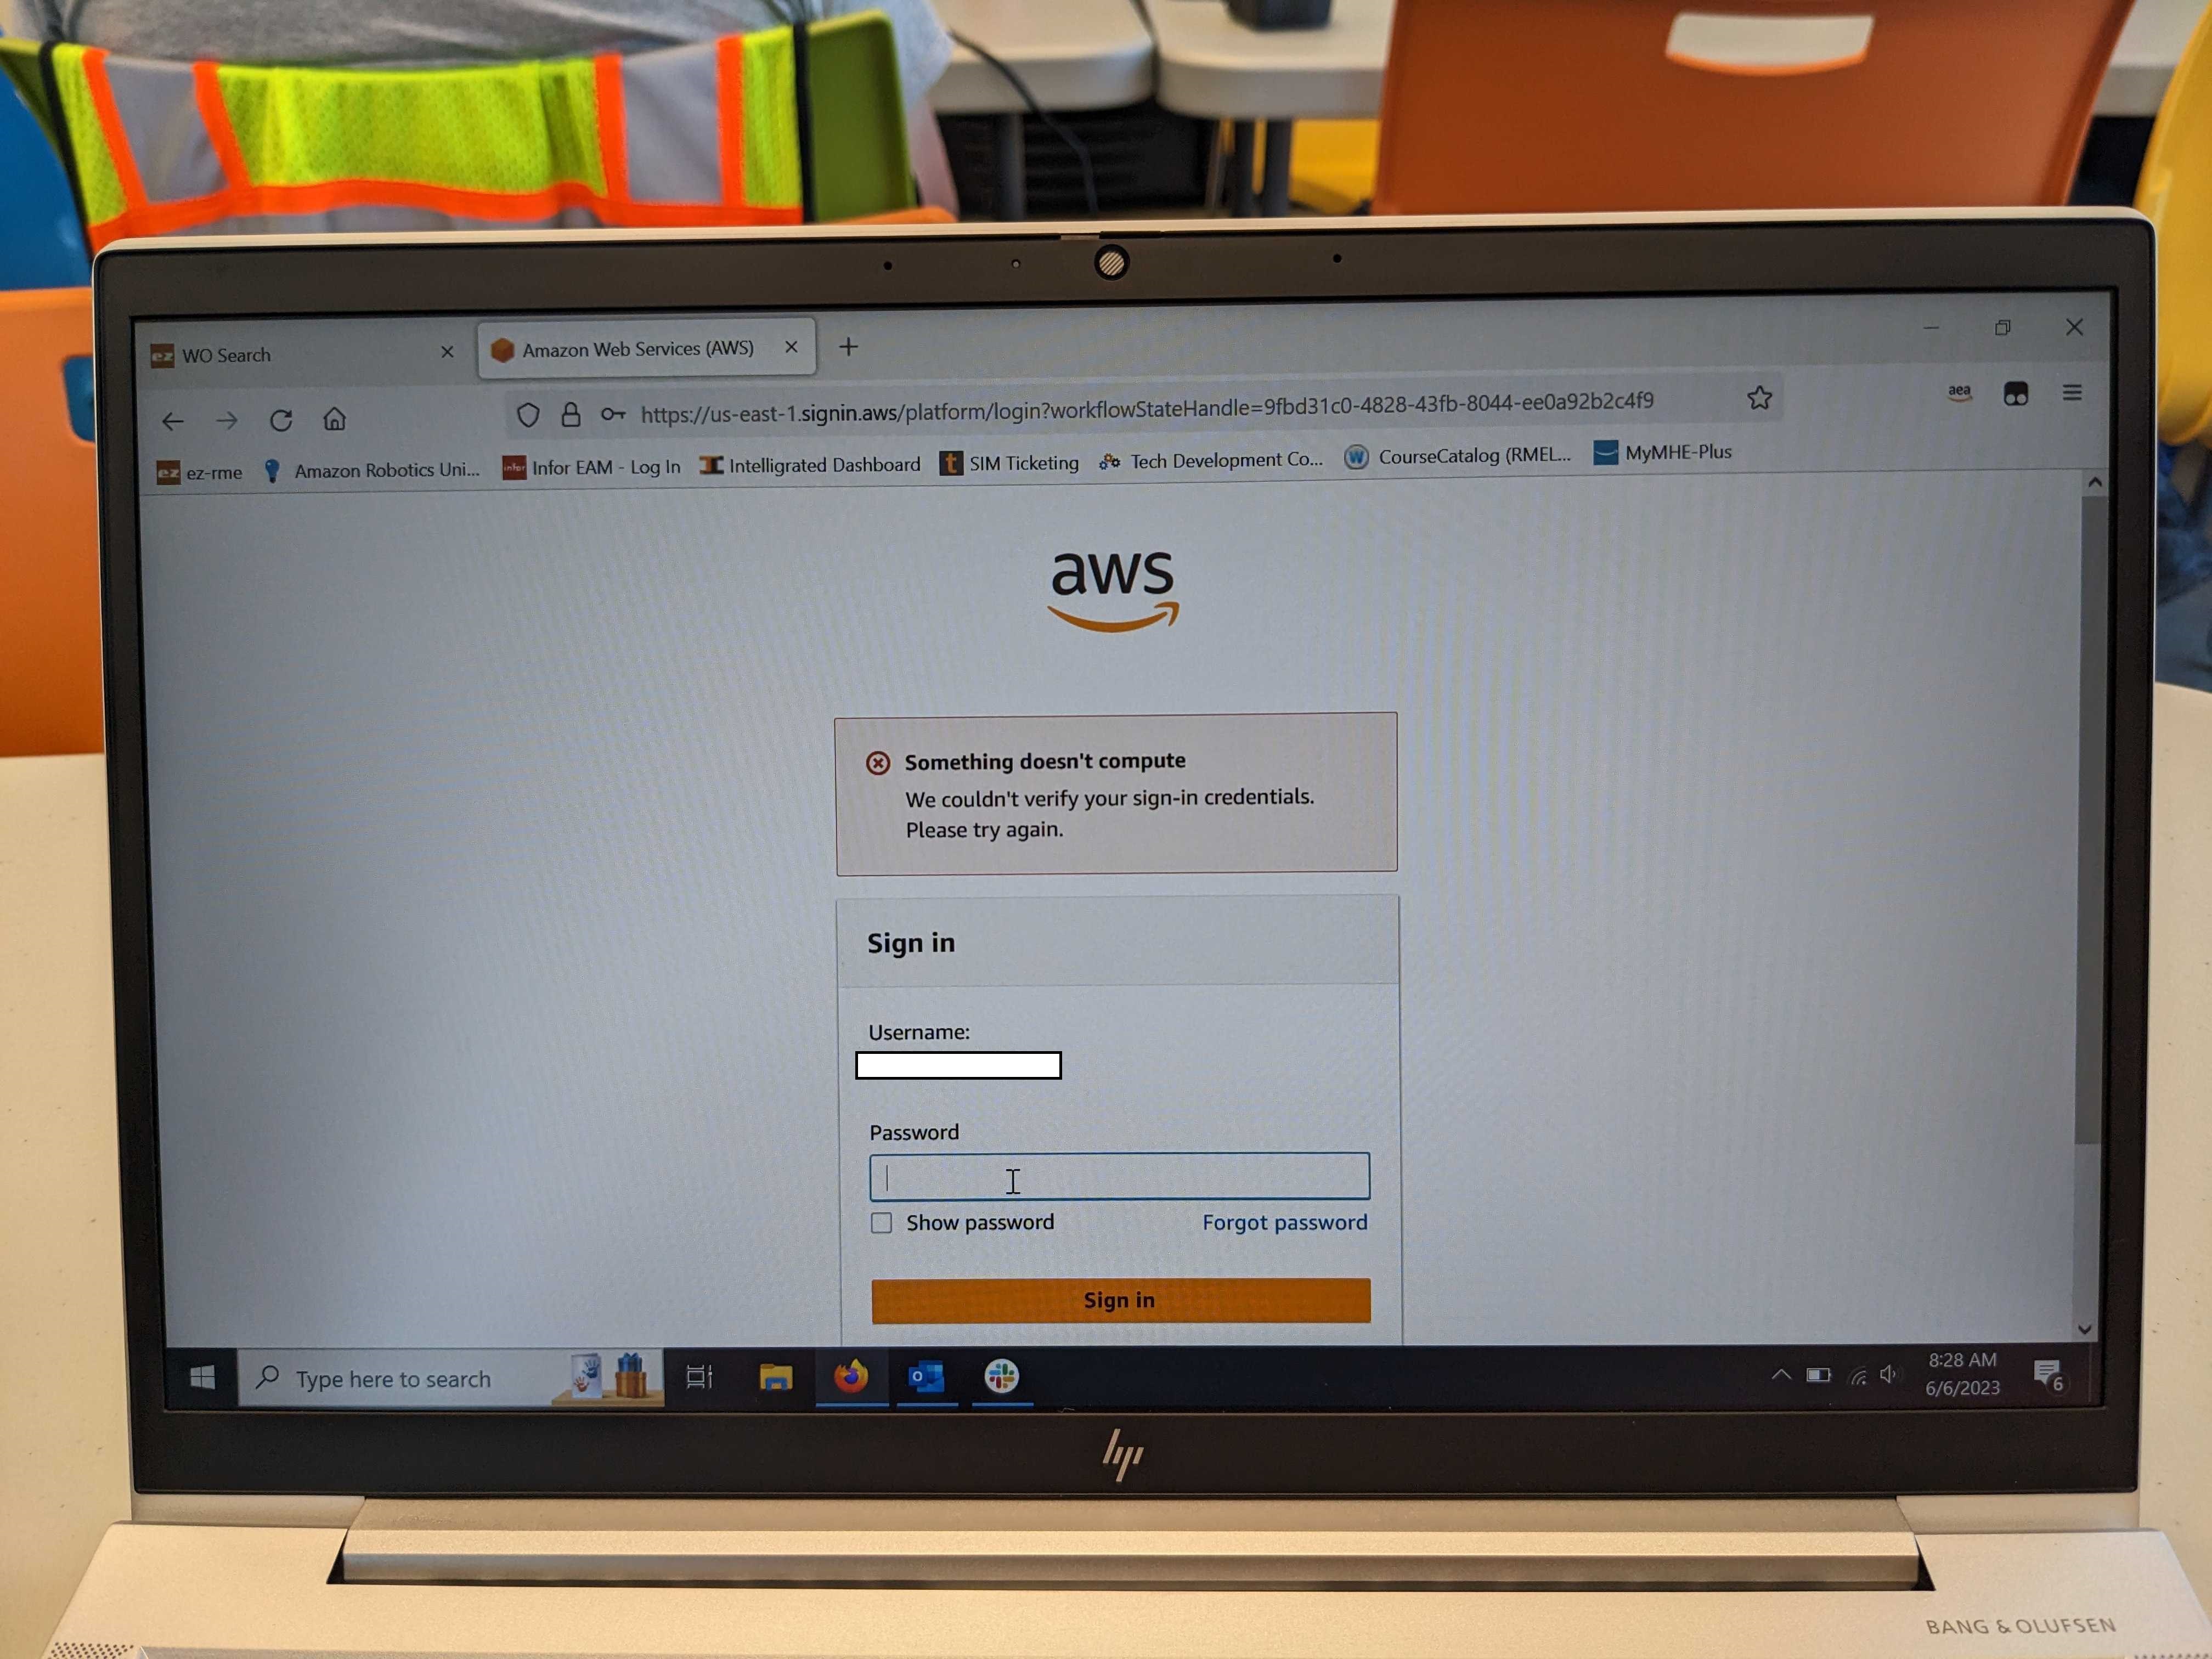 Tech was unable to get AWS sign in. This is the message they are getting